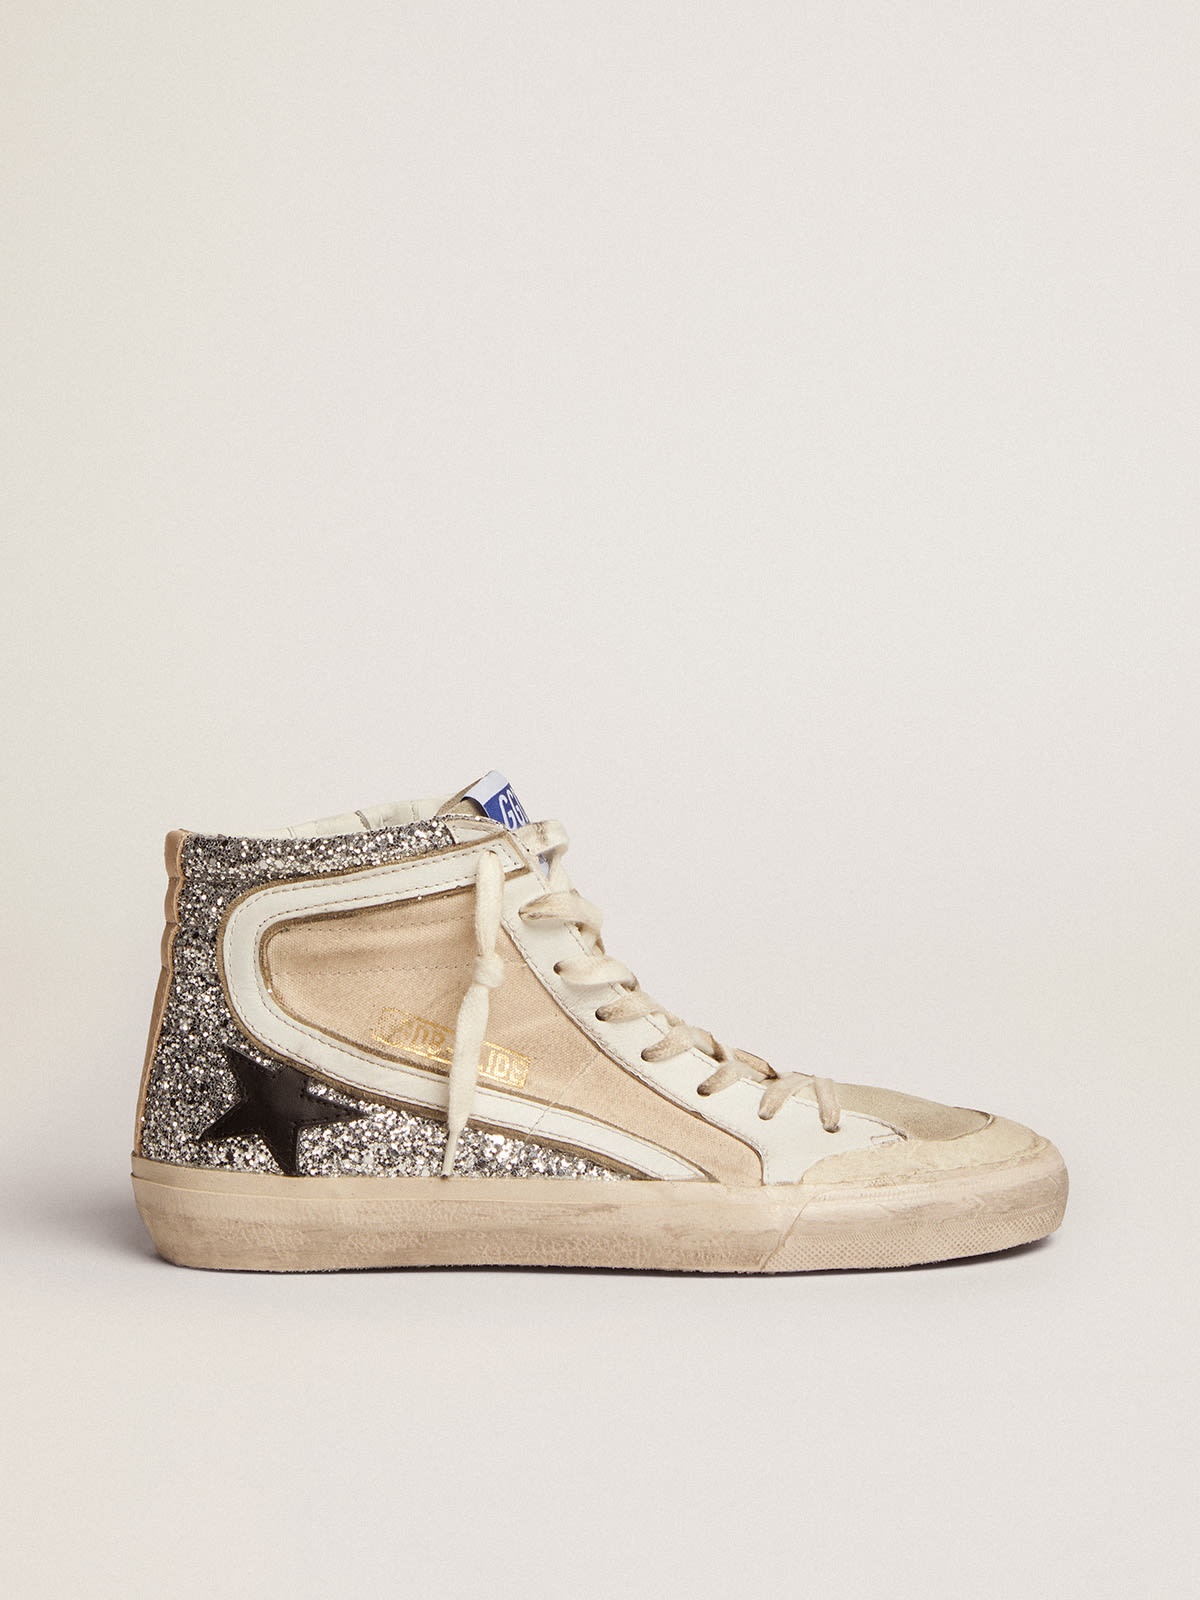 Golden Goose Penstar Slide sneakers in cream-colored canvas and silver  glitter with black leather star | REVERSIBLE